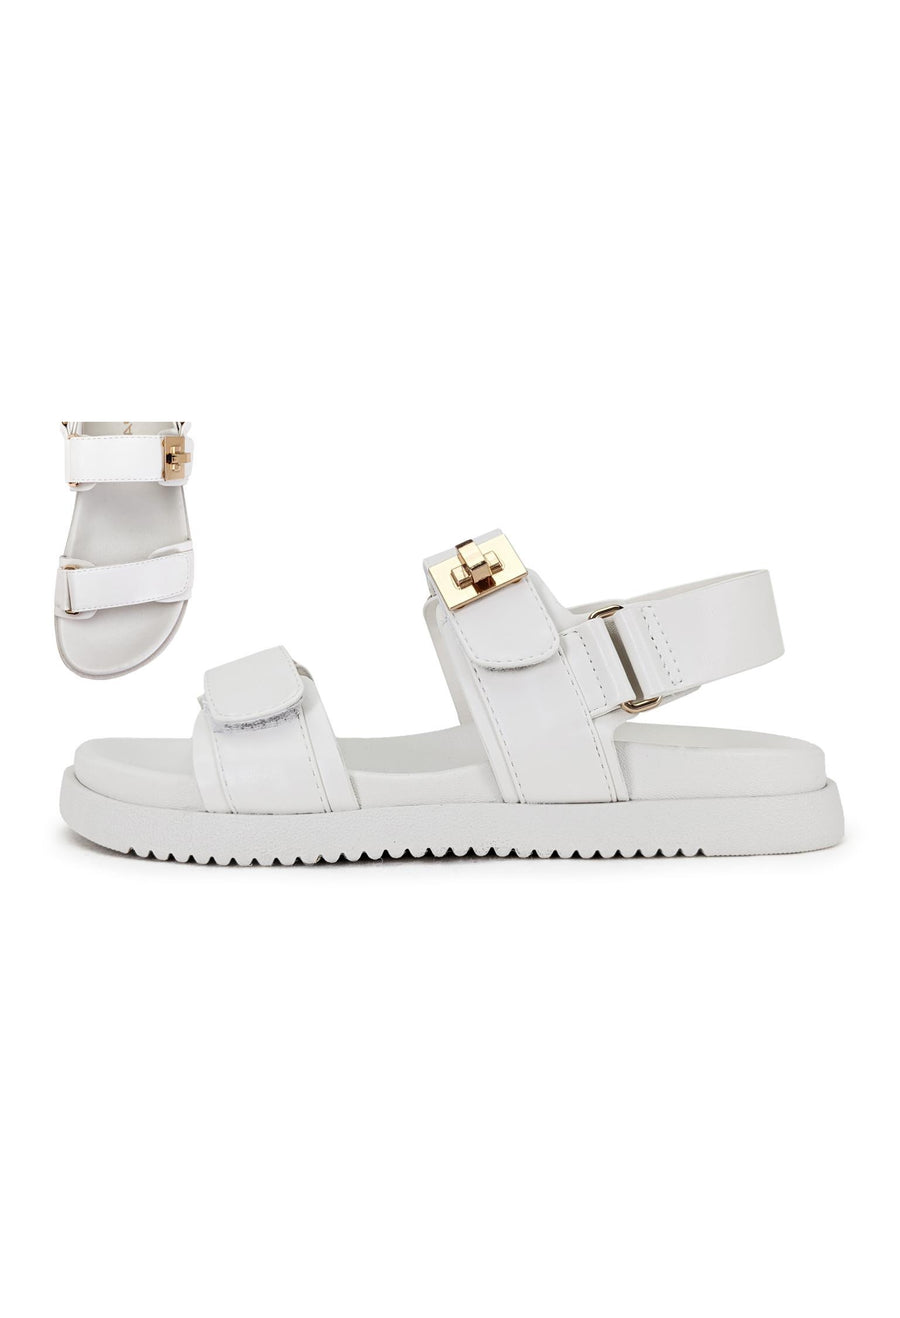 Featuring an open toed double strap sandle with buckle detail across the strap in the color bone 